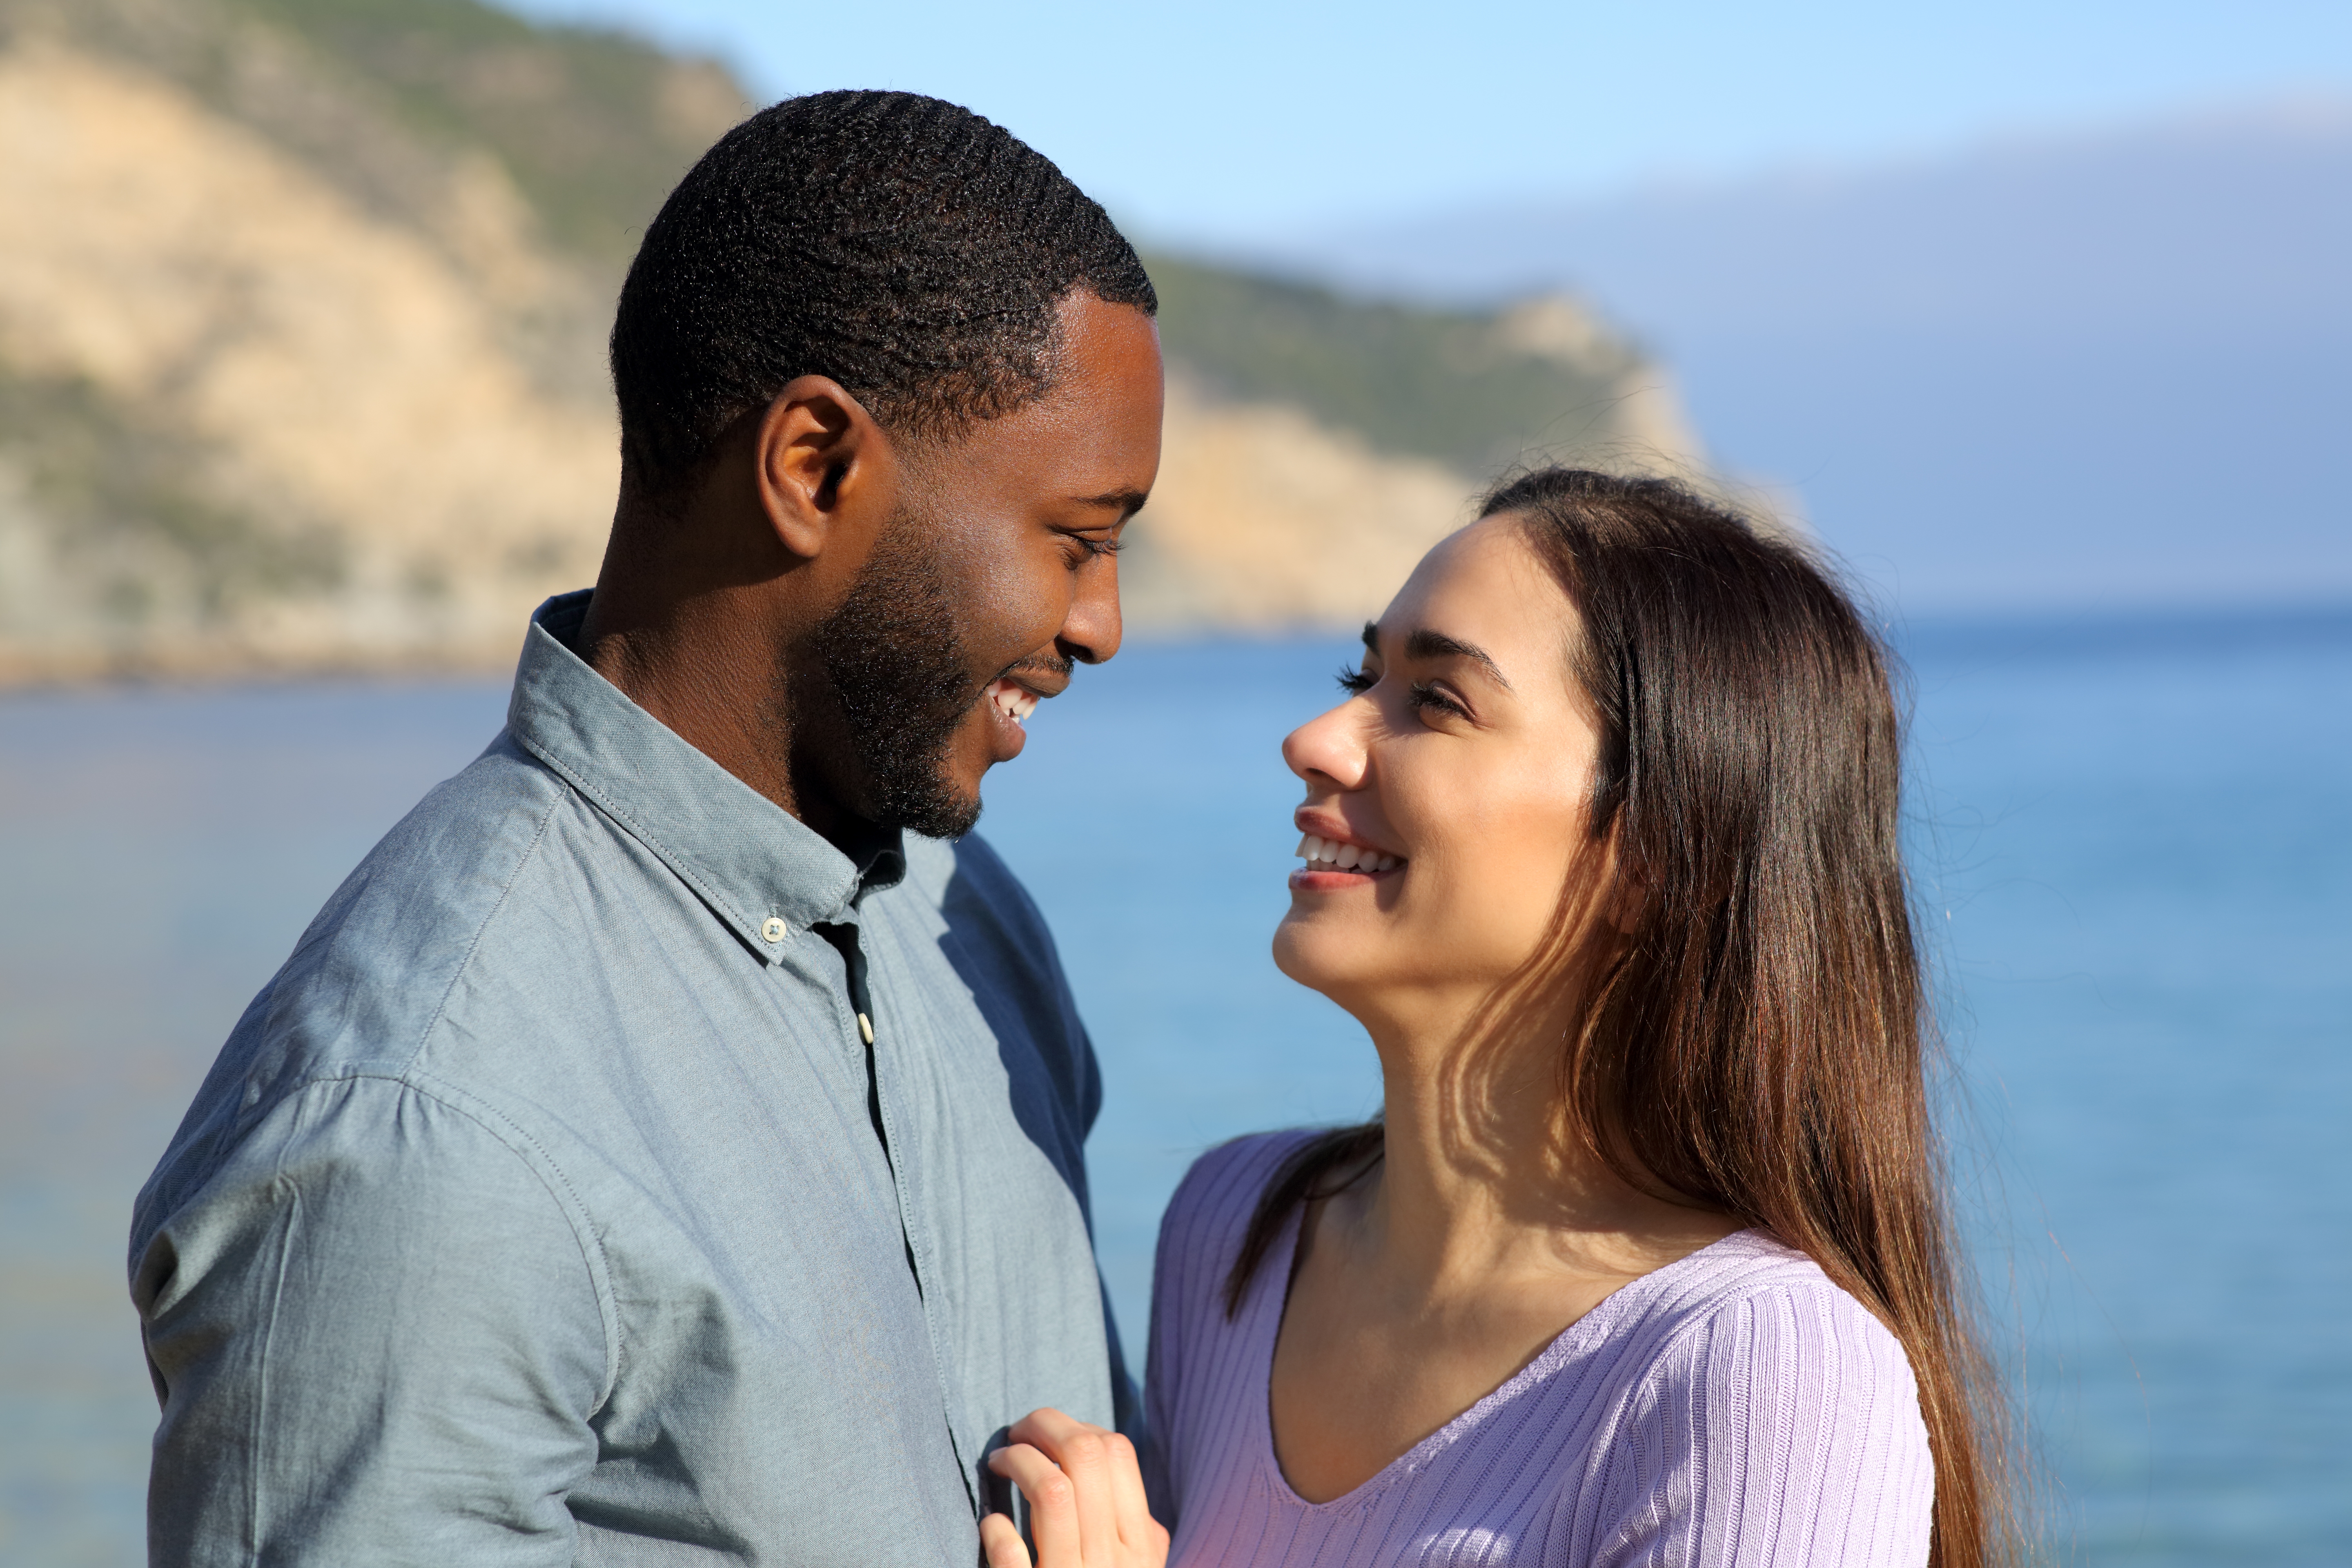 Interracial couple looking at each other | Source: Shutterstock